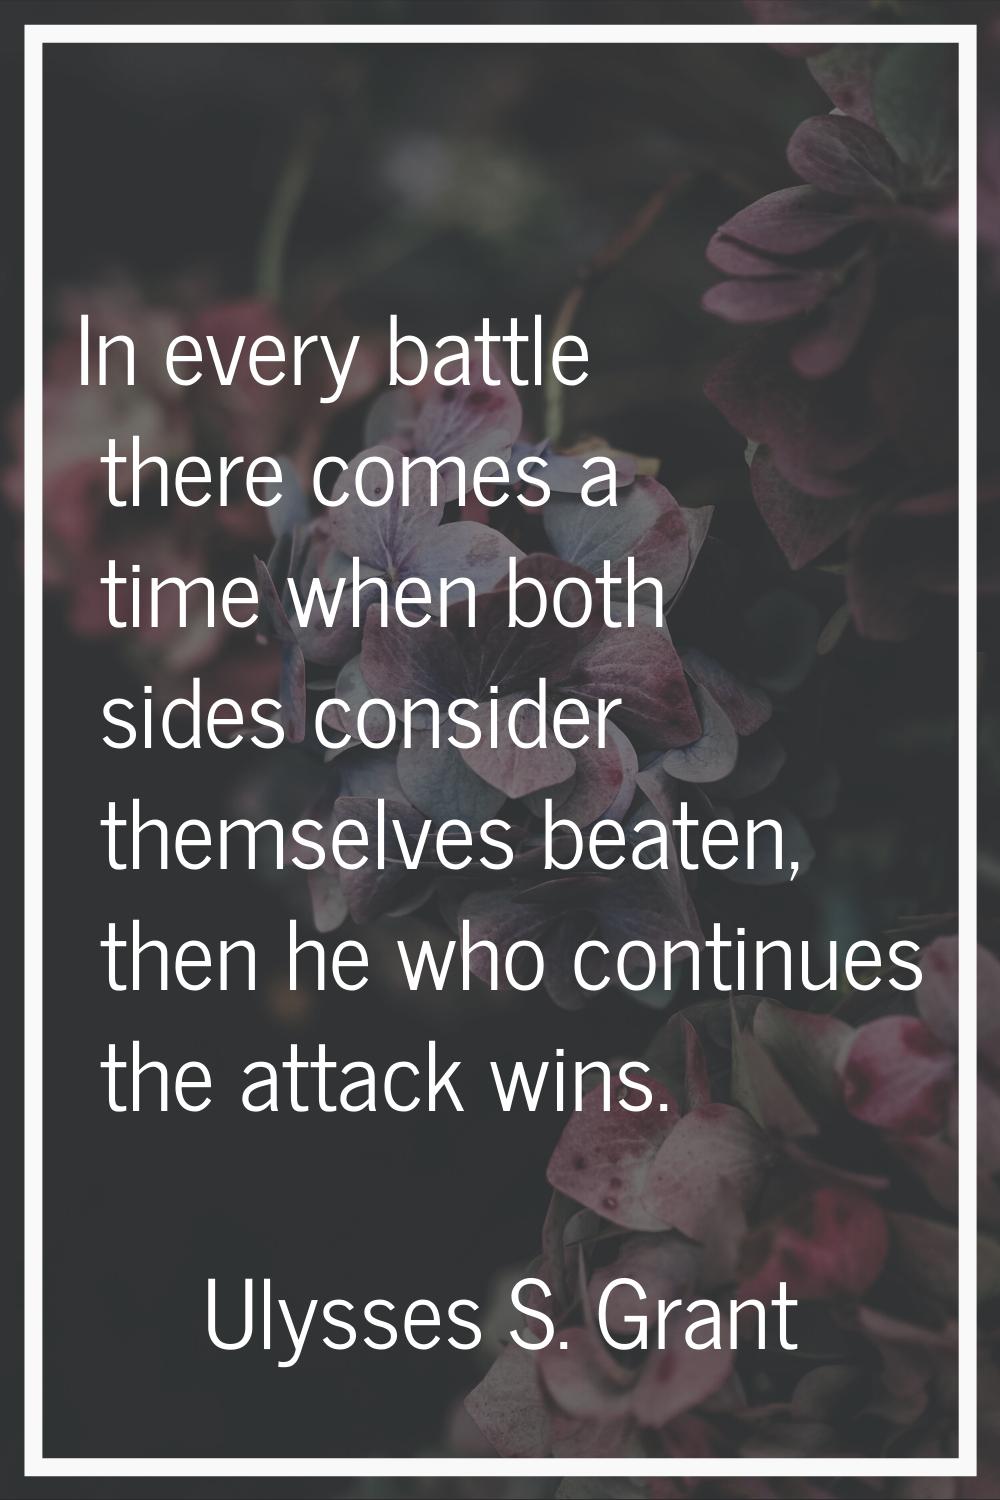 In every battle there comes a time when both sides consider themselves beaten, then he who continue